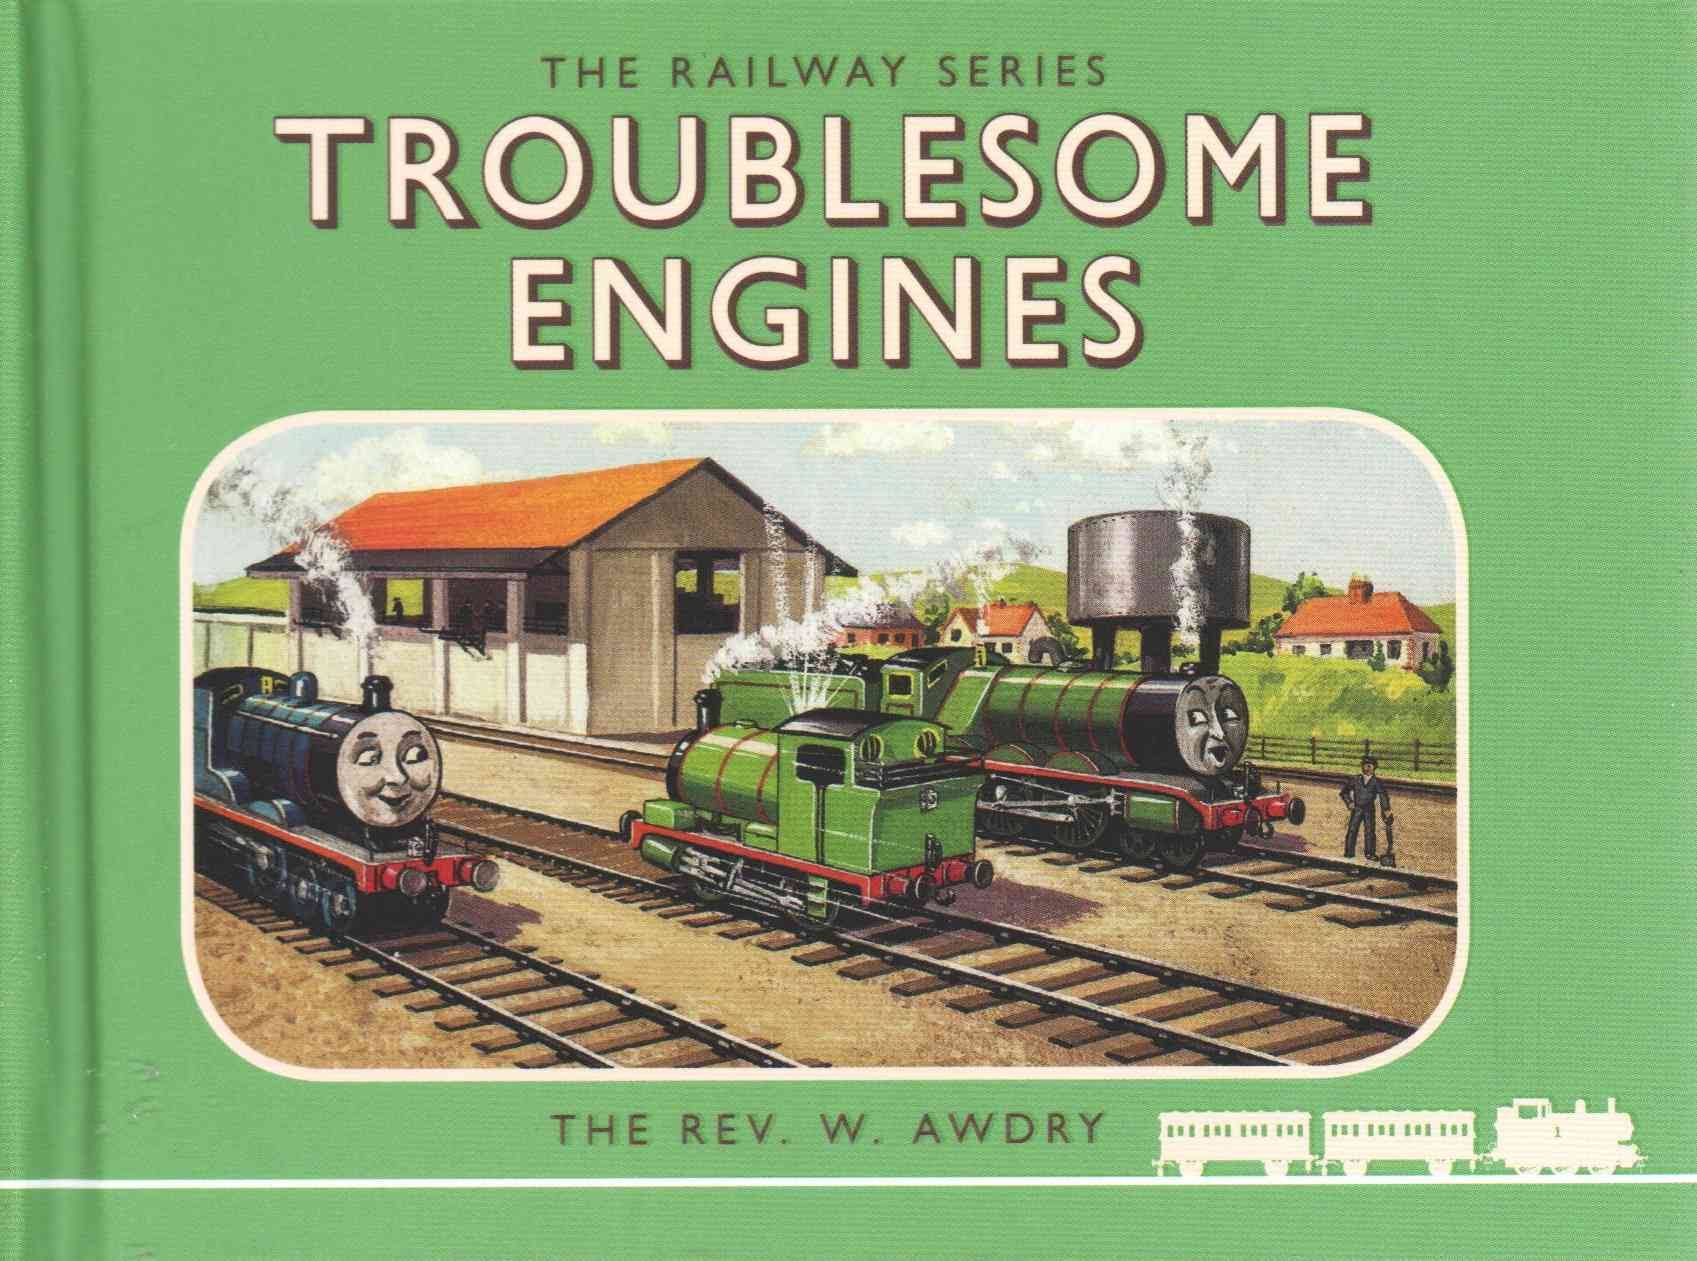 Troublesome engines